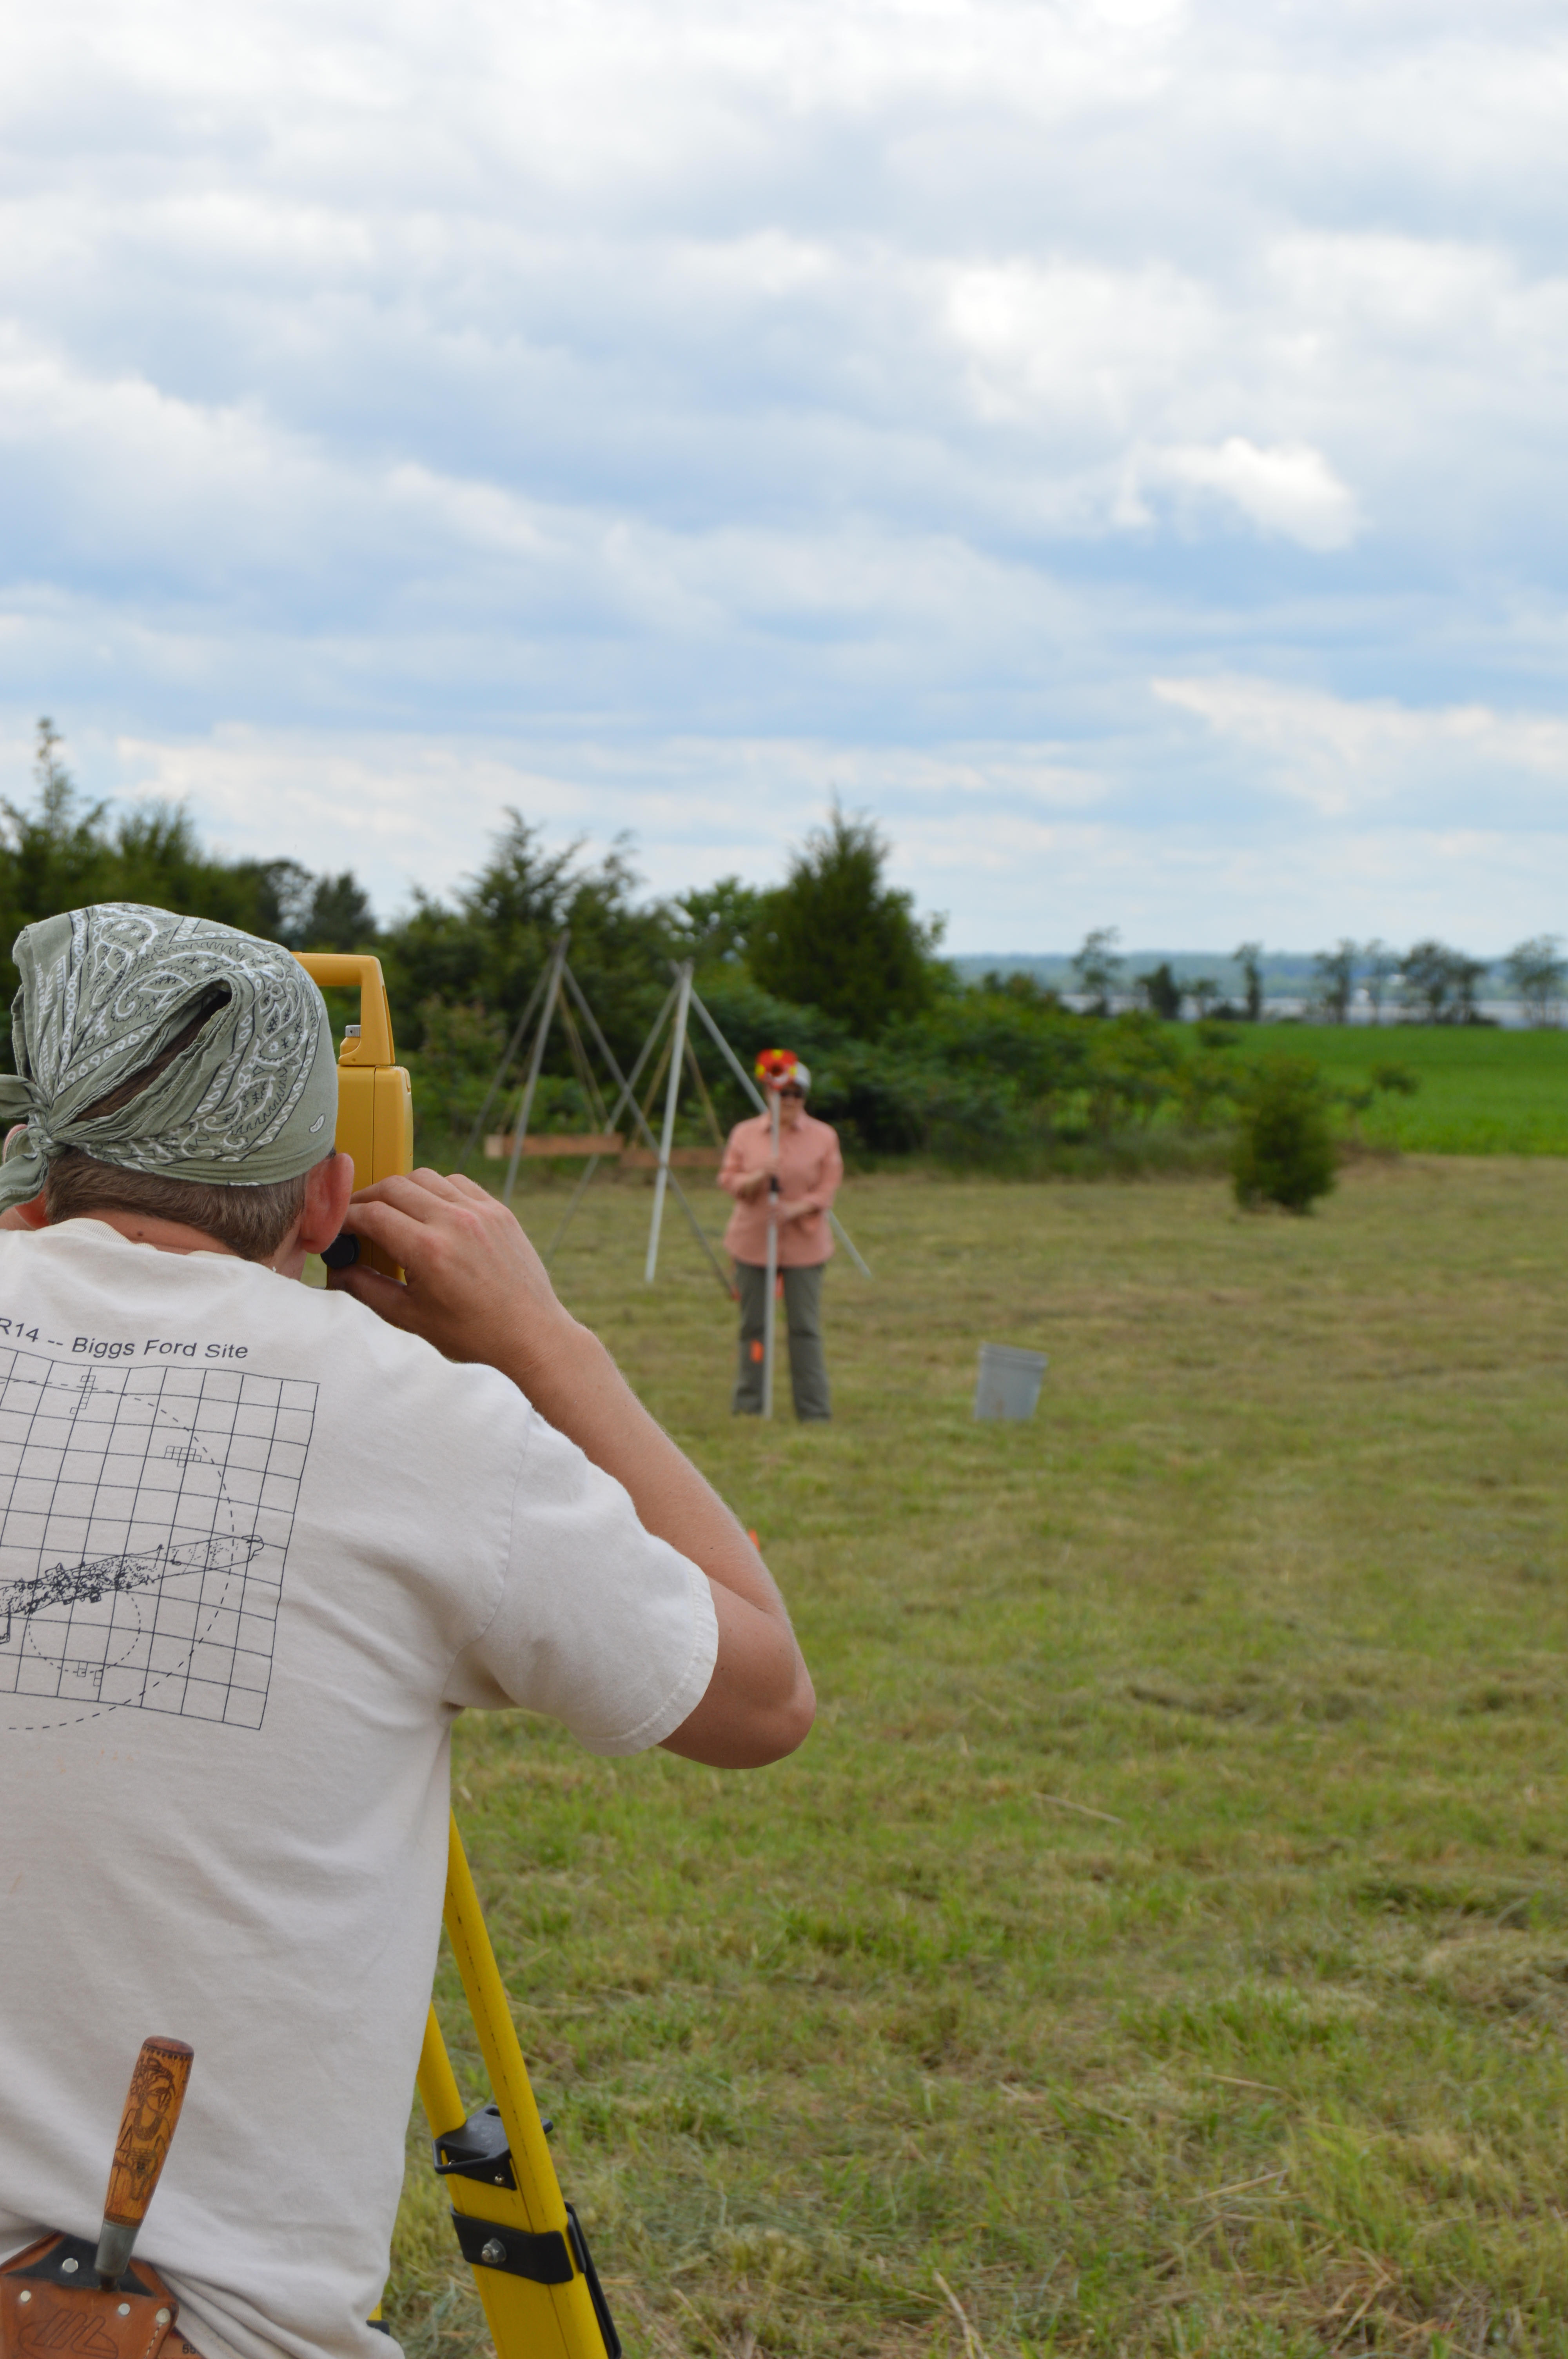 CfMA members map a site using a surveyor's total station